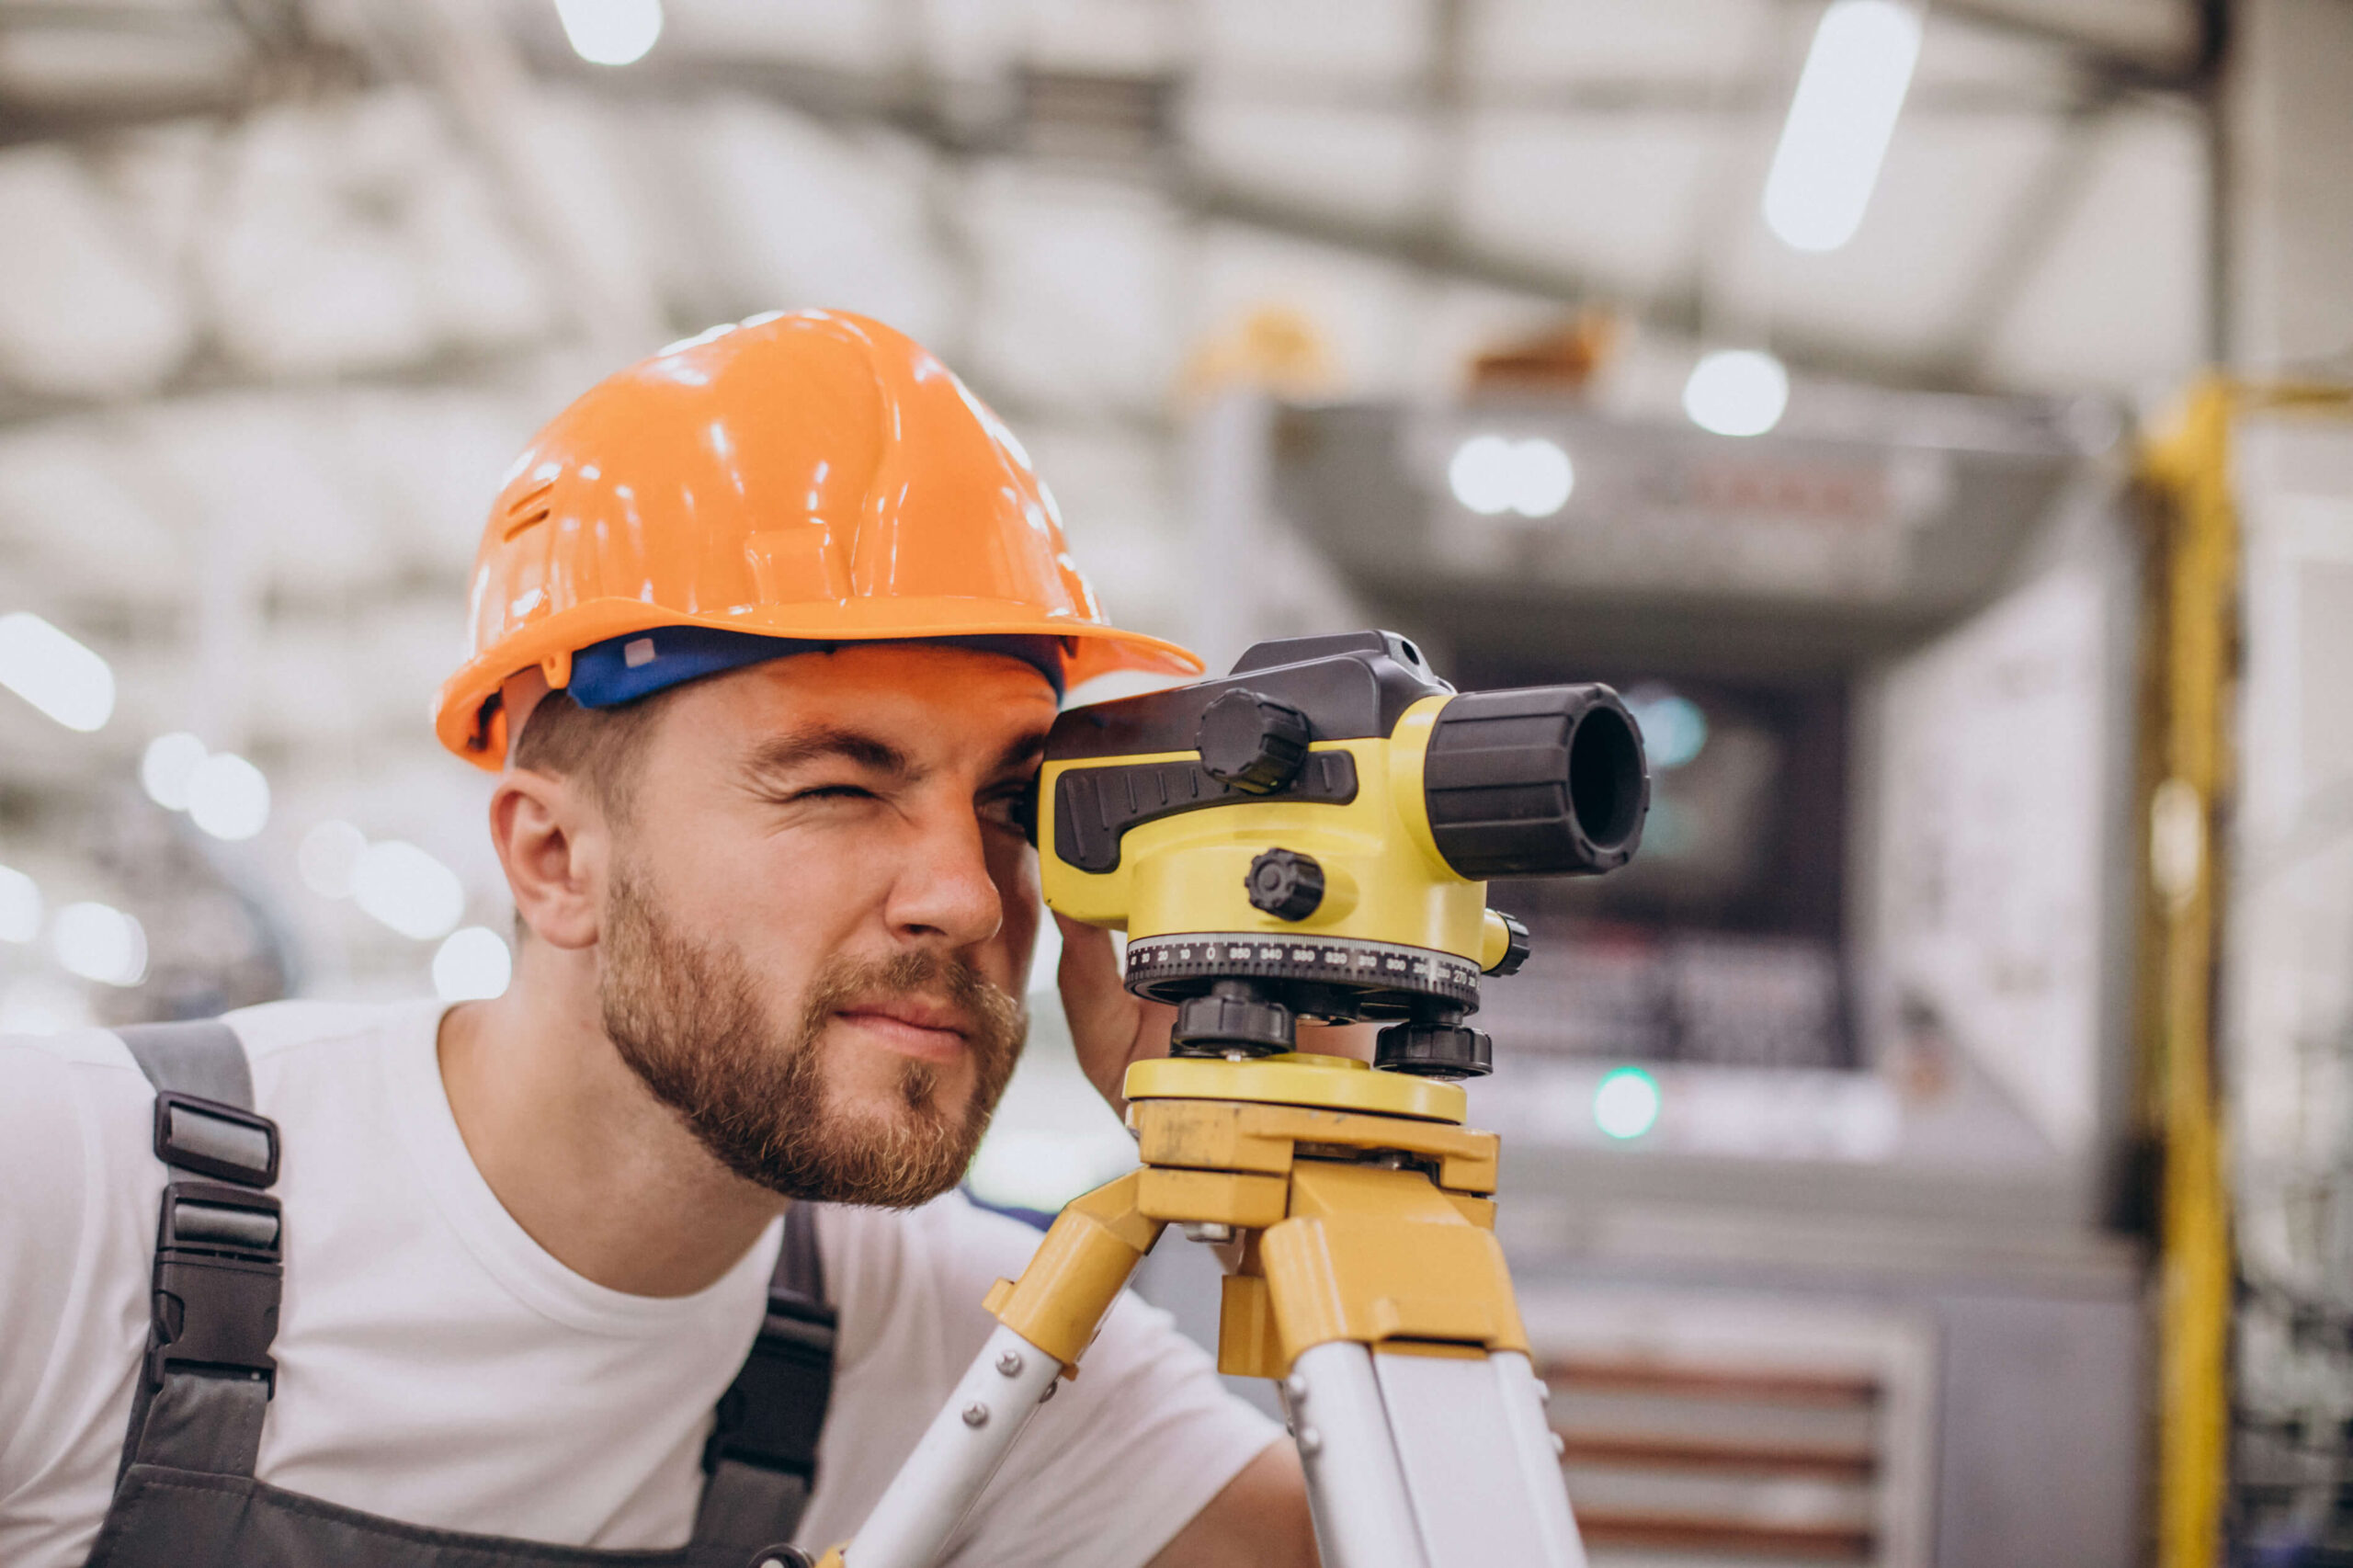 How to Become a Building Surveyor: Skills, Qualifications & Courses